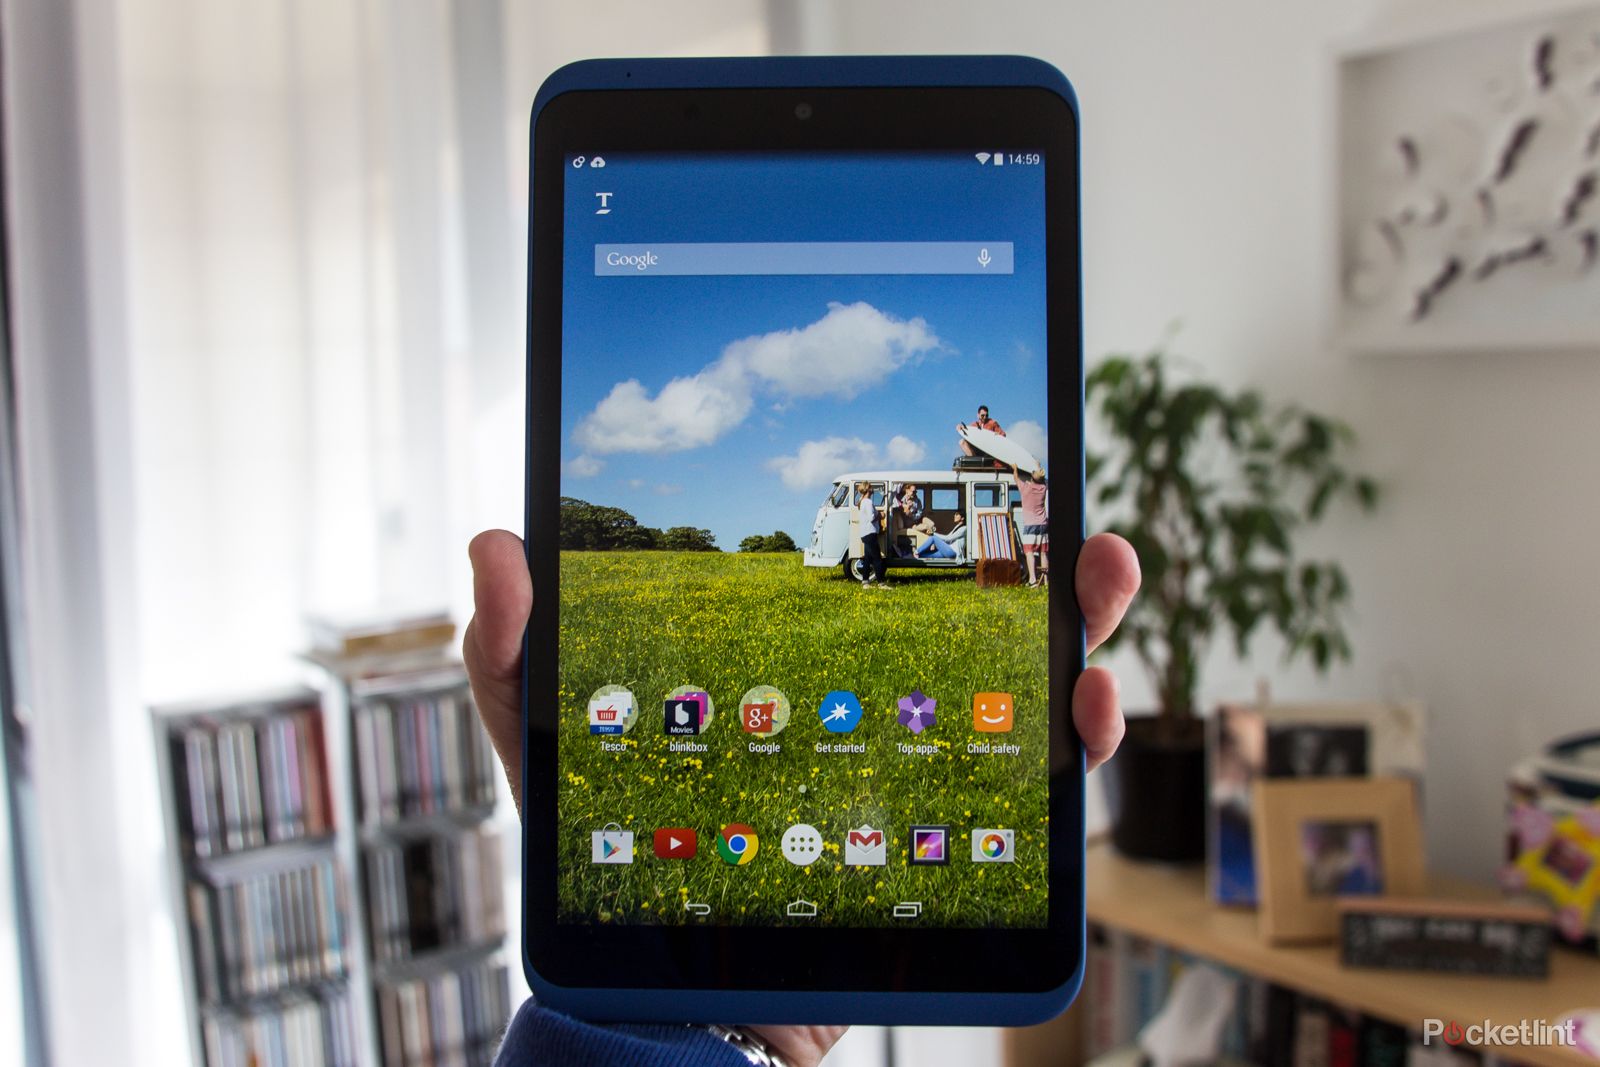 tesco hudl 2 vs amazon fire hd 7 which budget tablet to choose image 2